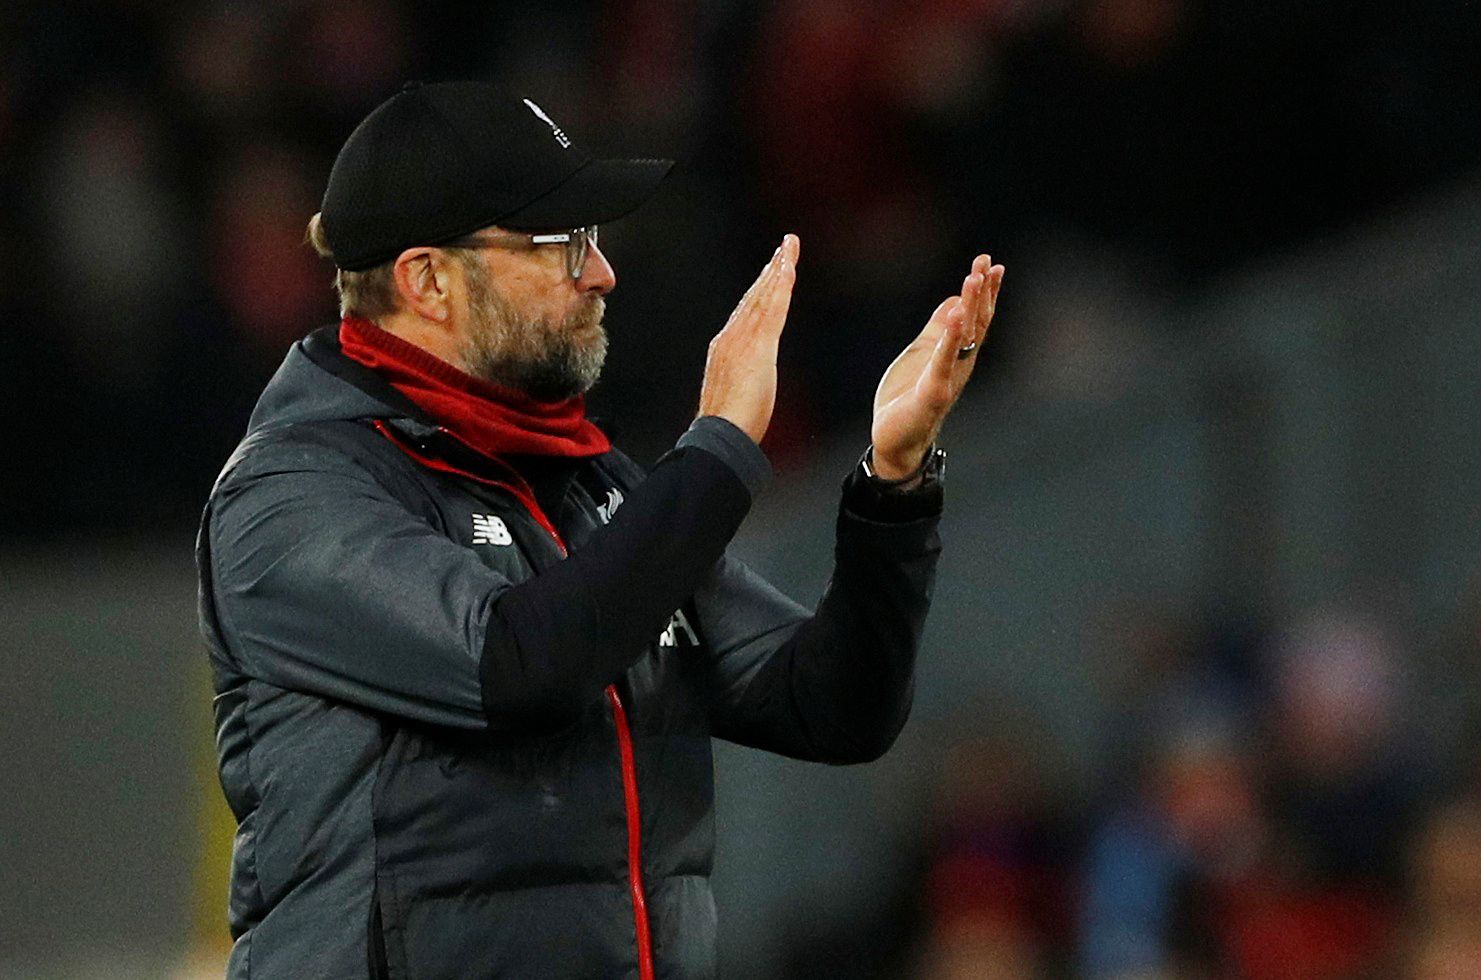 Soccer Football - Champions League - Group E - Liverpool v Napoli - Anfield, Liverpool, Britain - November 27, 2019  Liverpool manager Juergen Klopp after the match   REUTERS/Phil Noble